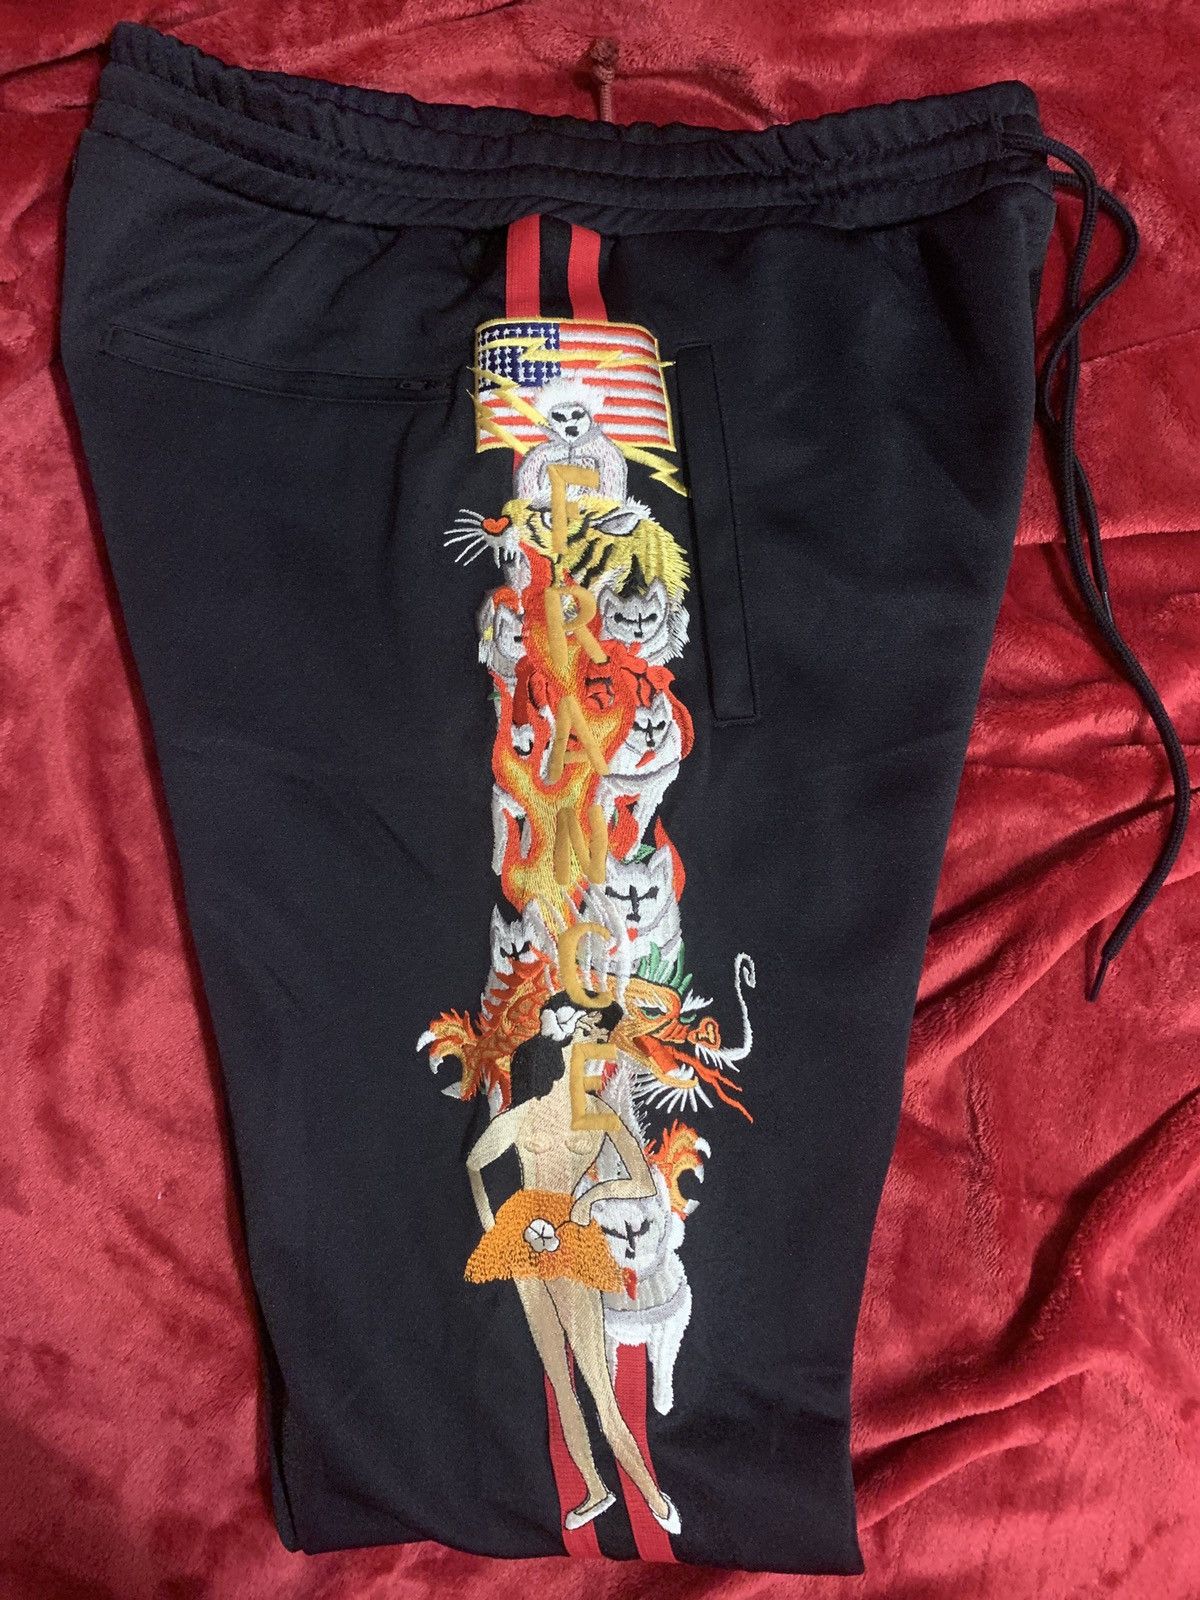 Doublet Doublet chaos embroidery track pants black and red | Grailed